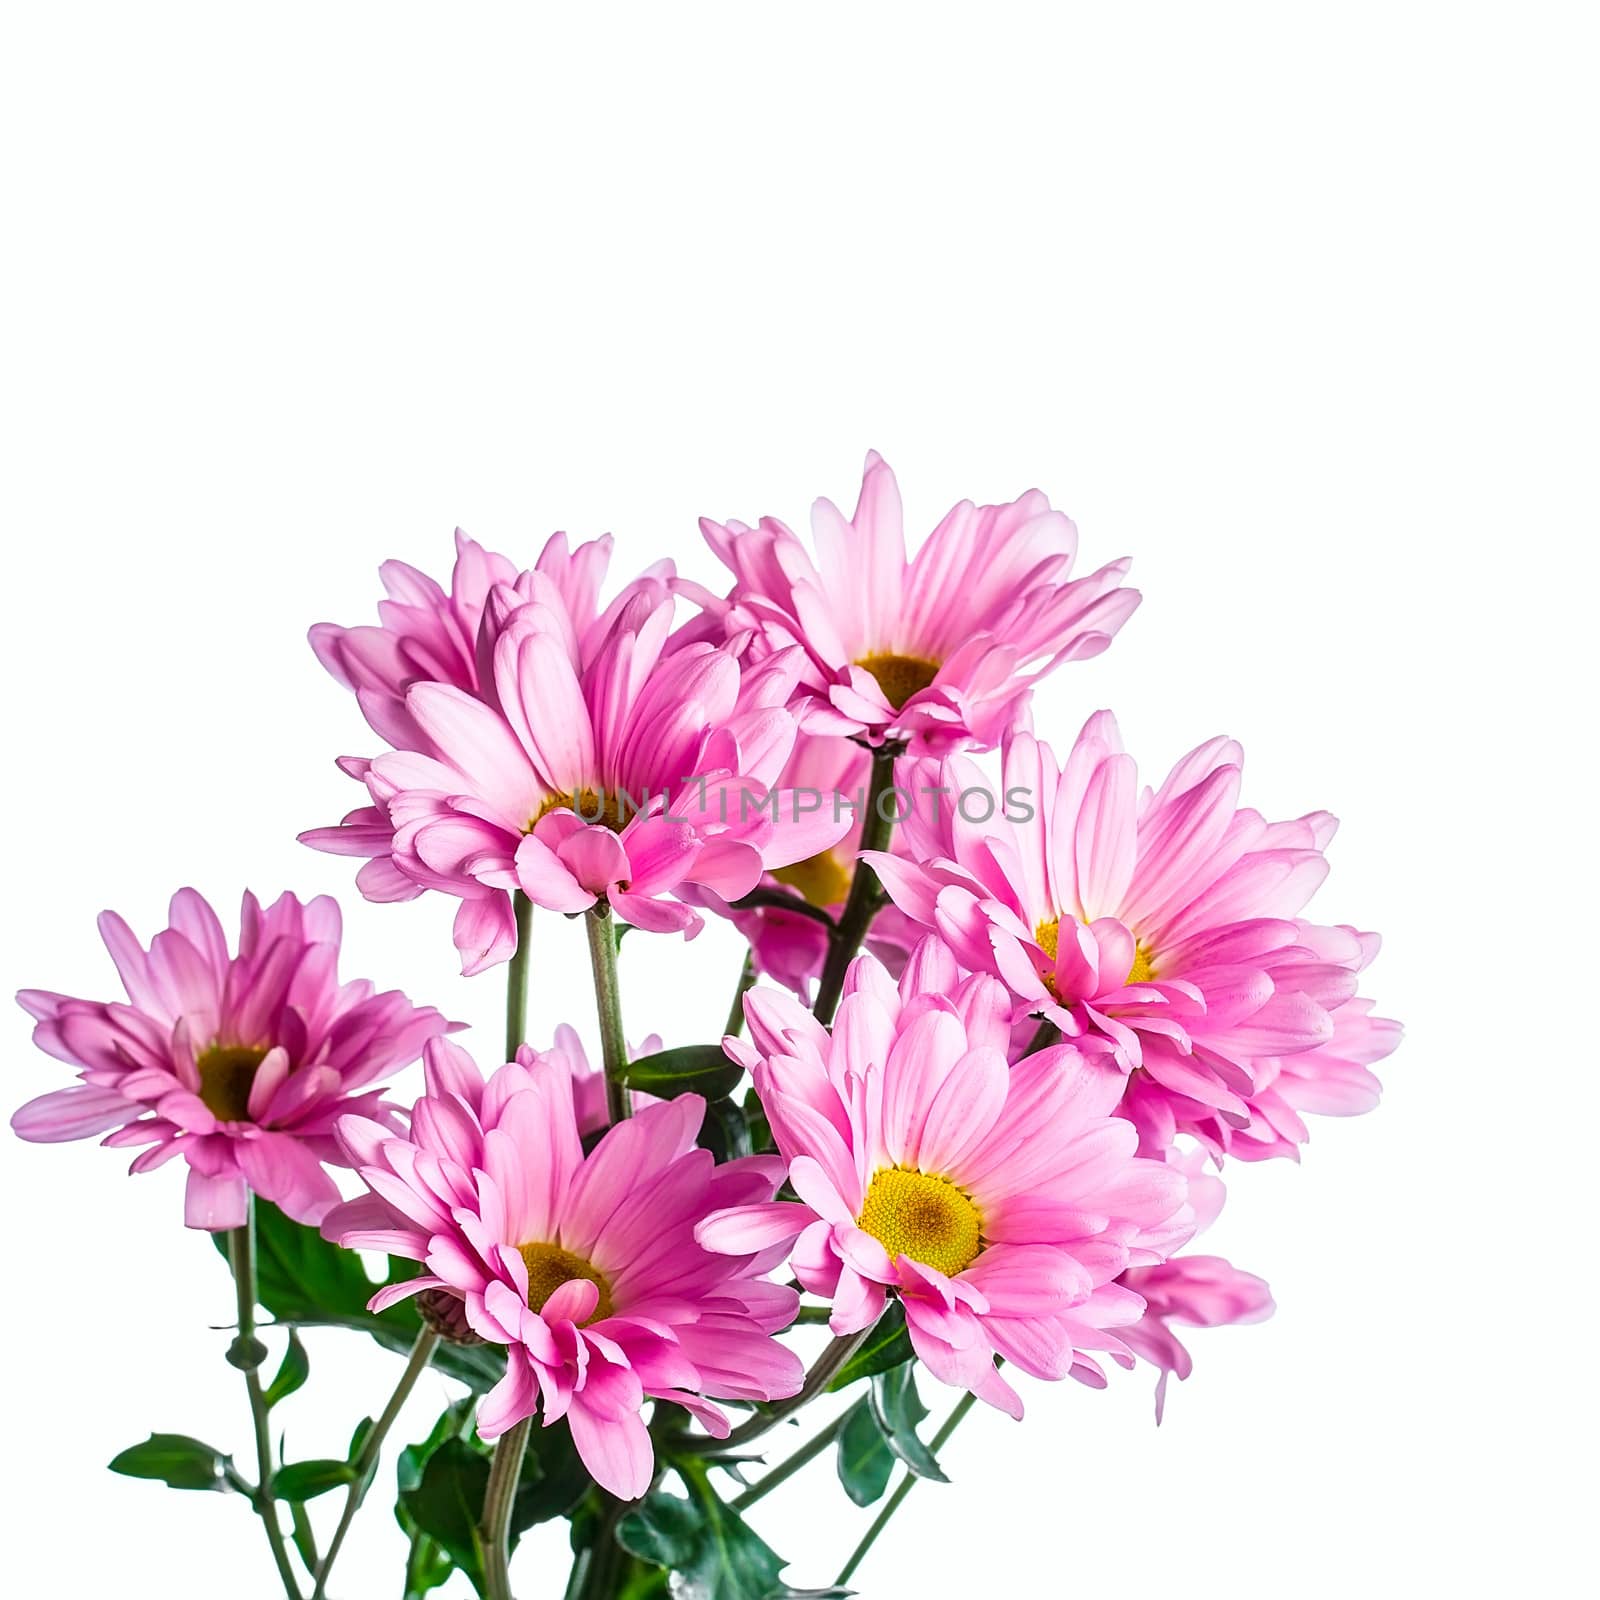 pink chrysanthemum  flower isolated on white background